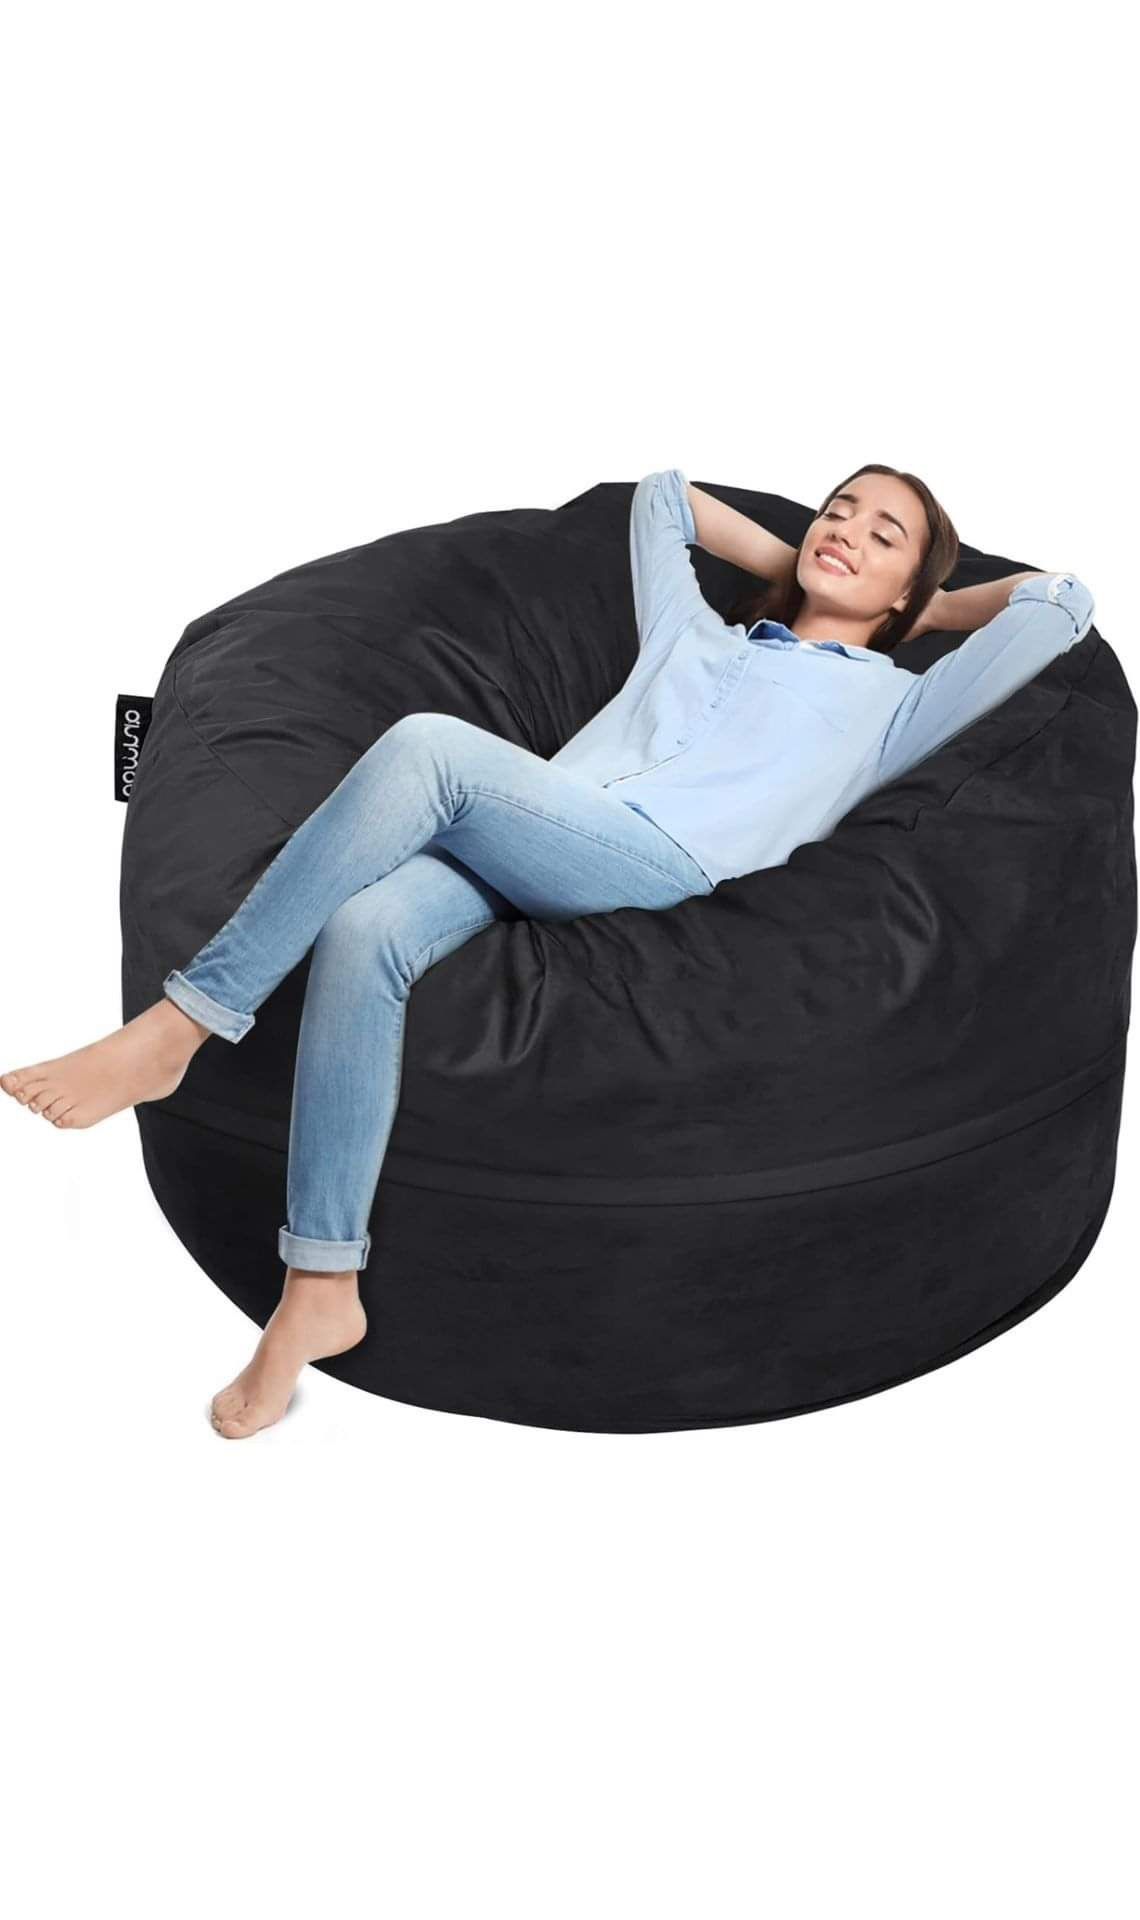 Anuwaa Giant 4ft Memory Foam Bean Bag Chair w/ Removable Cover - Black